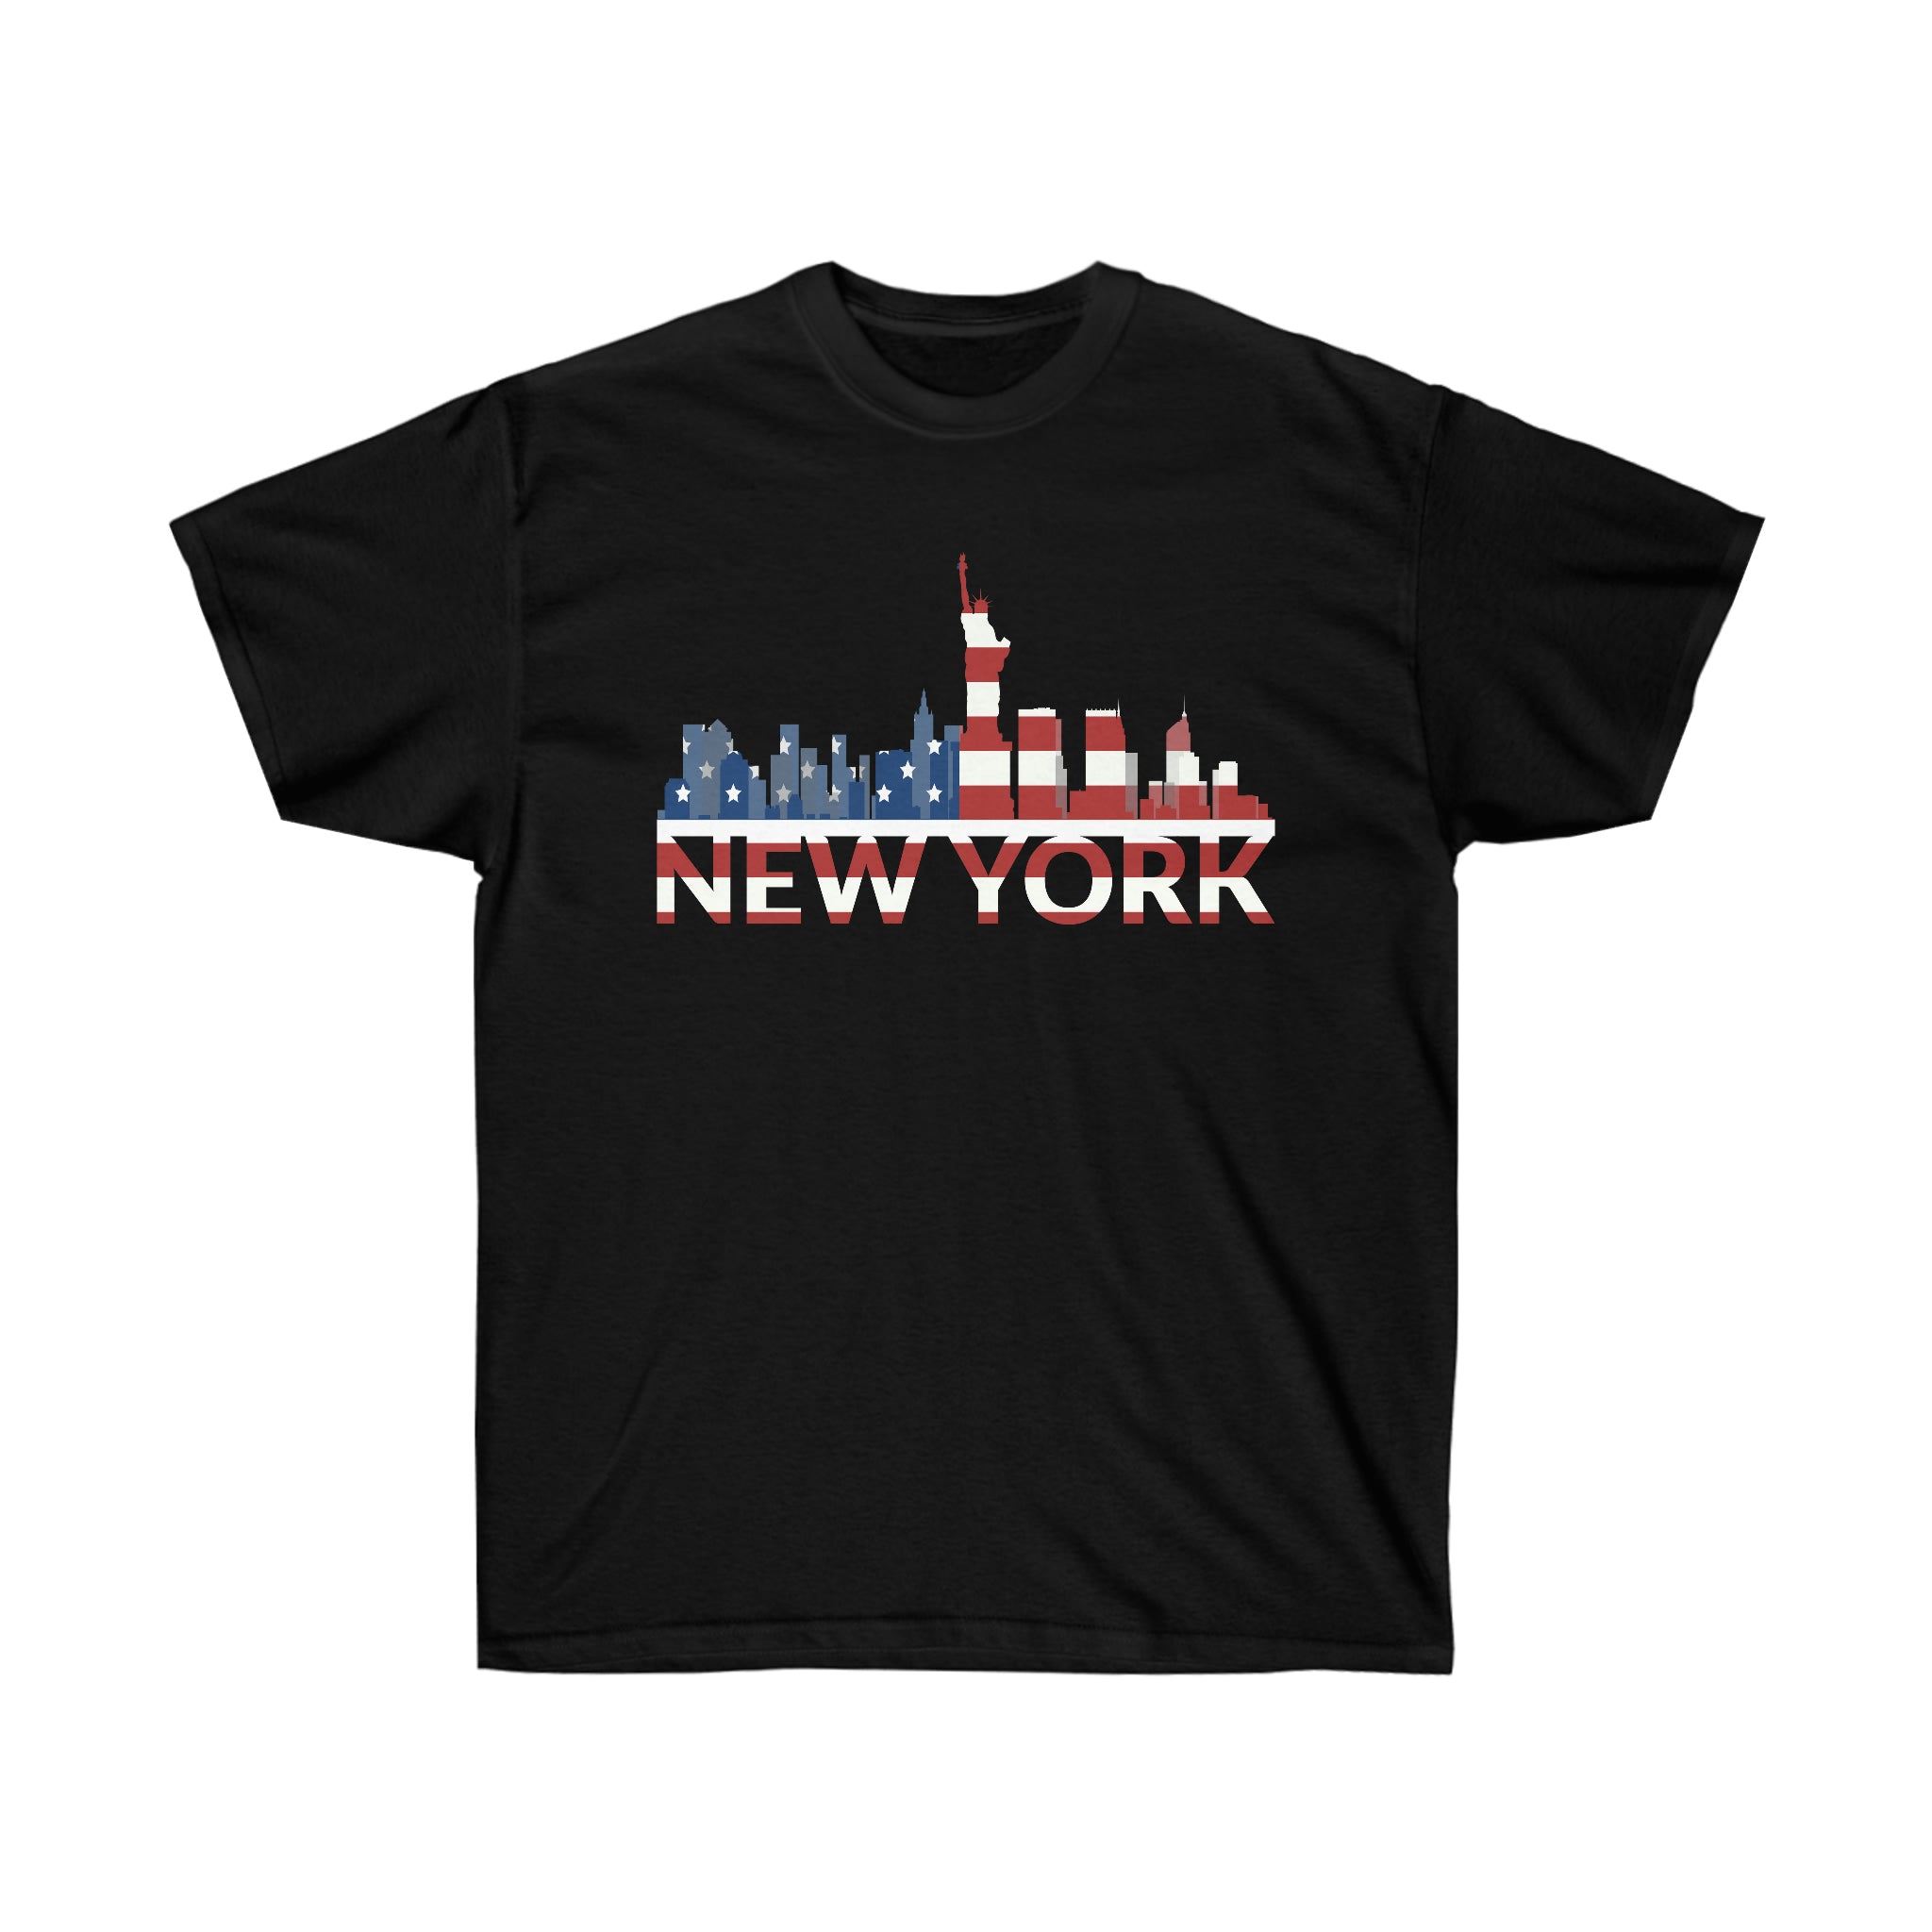 Unisex Ultra Cotton Tee "Higher Quality Materials"(NEW YORK)